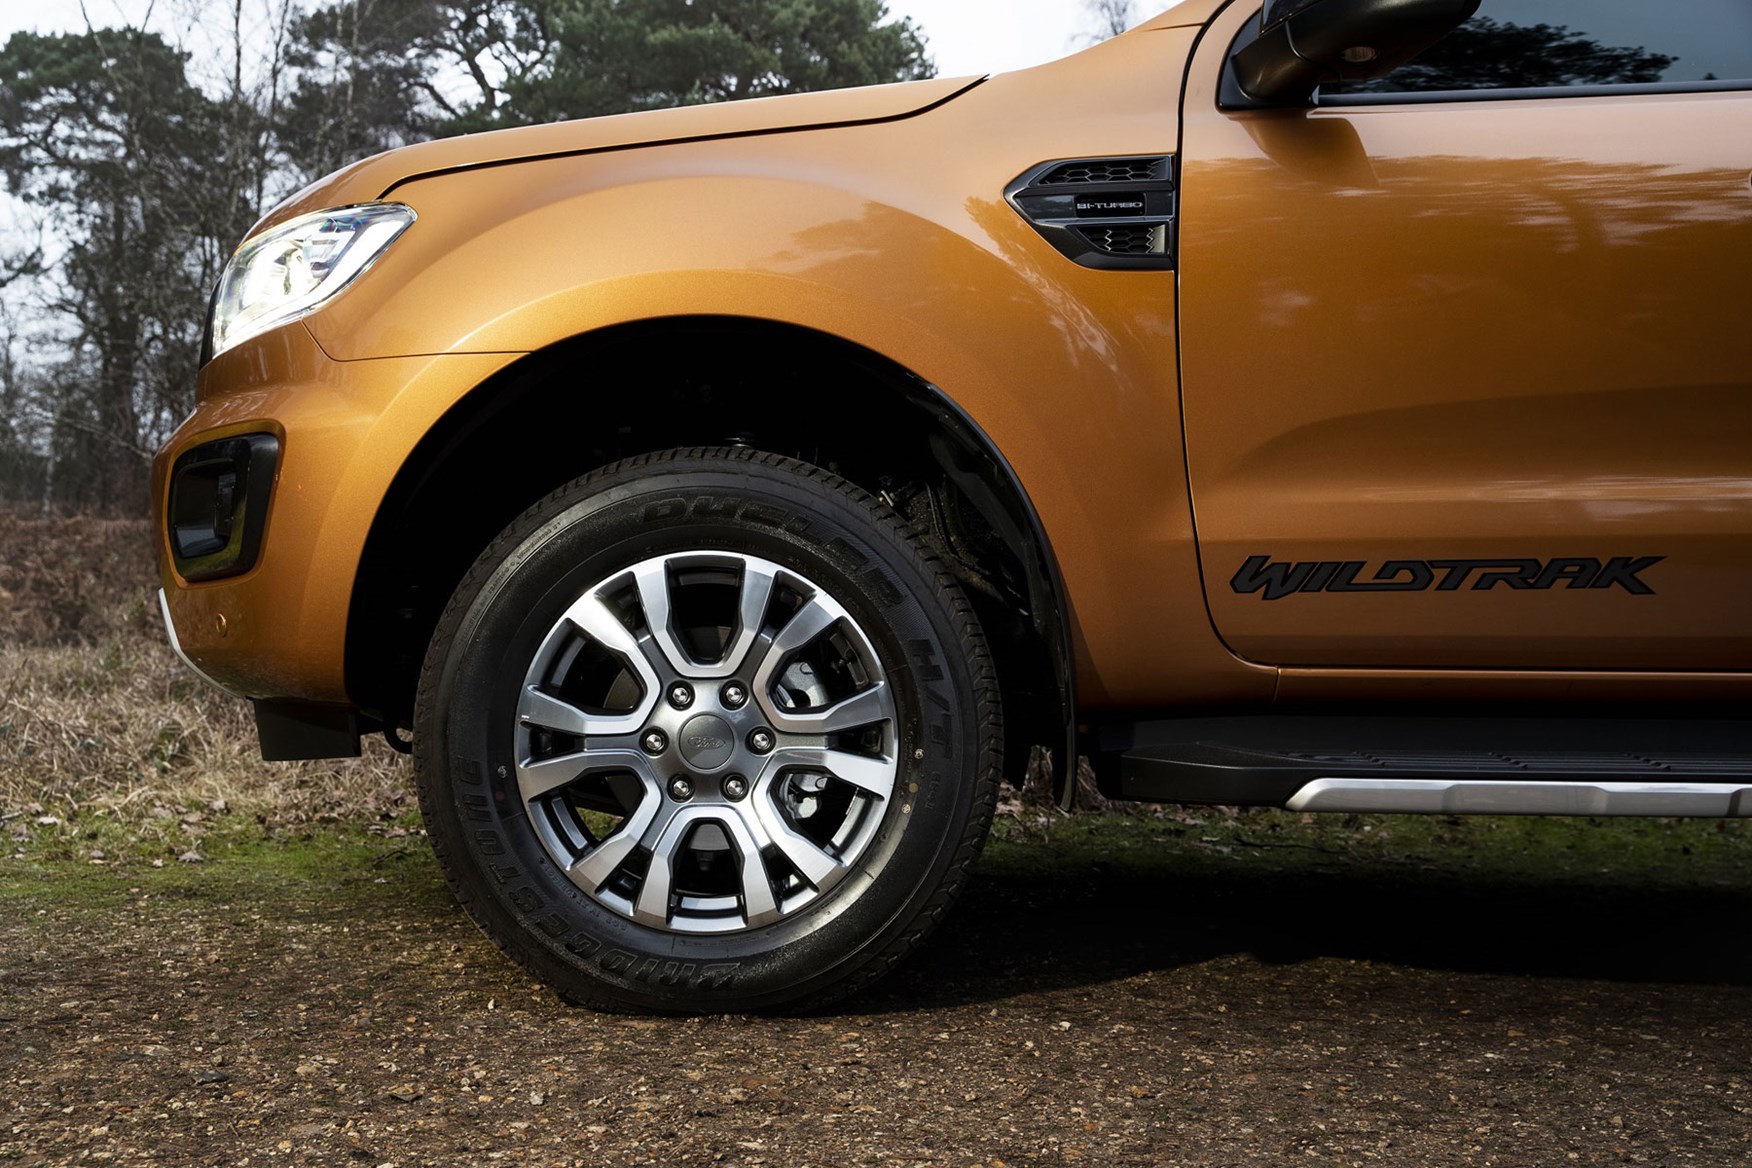 Ford Ranger review - 2019 facelift, close-up of front wheel and wing area, orange